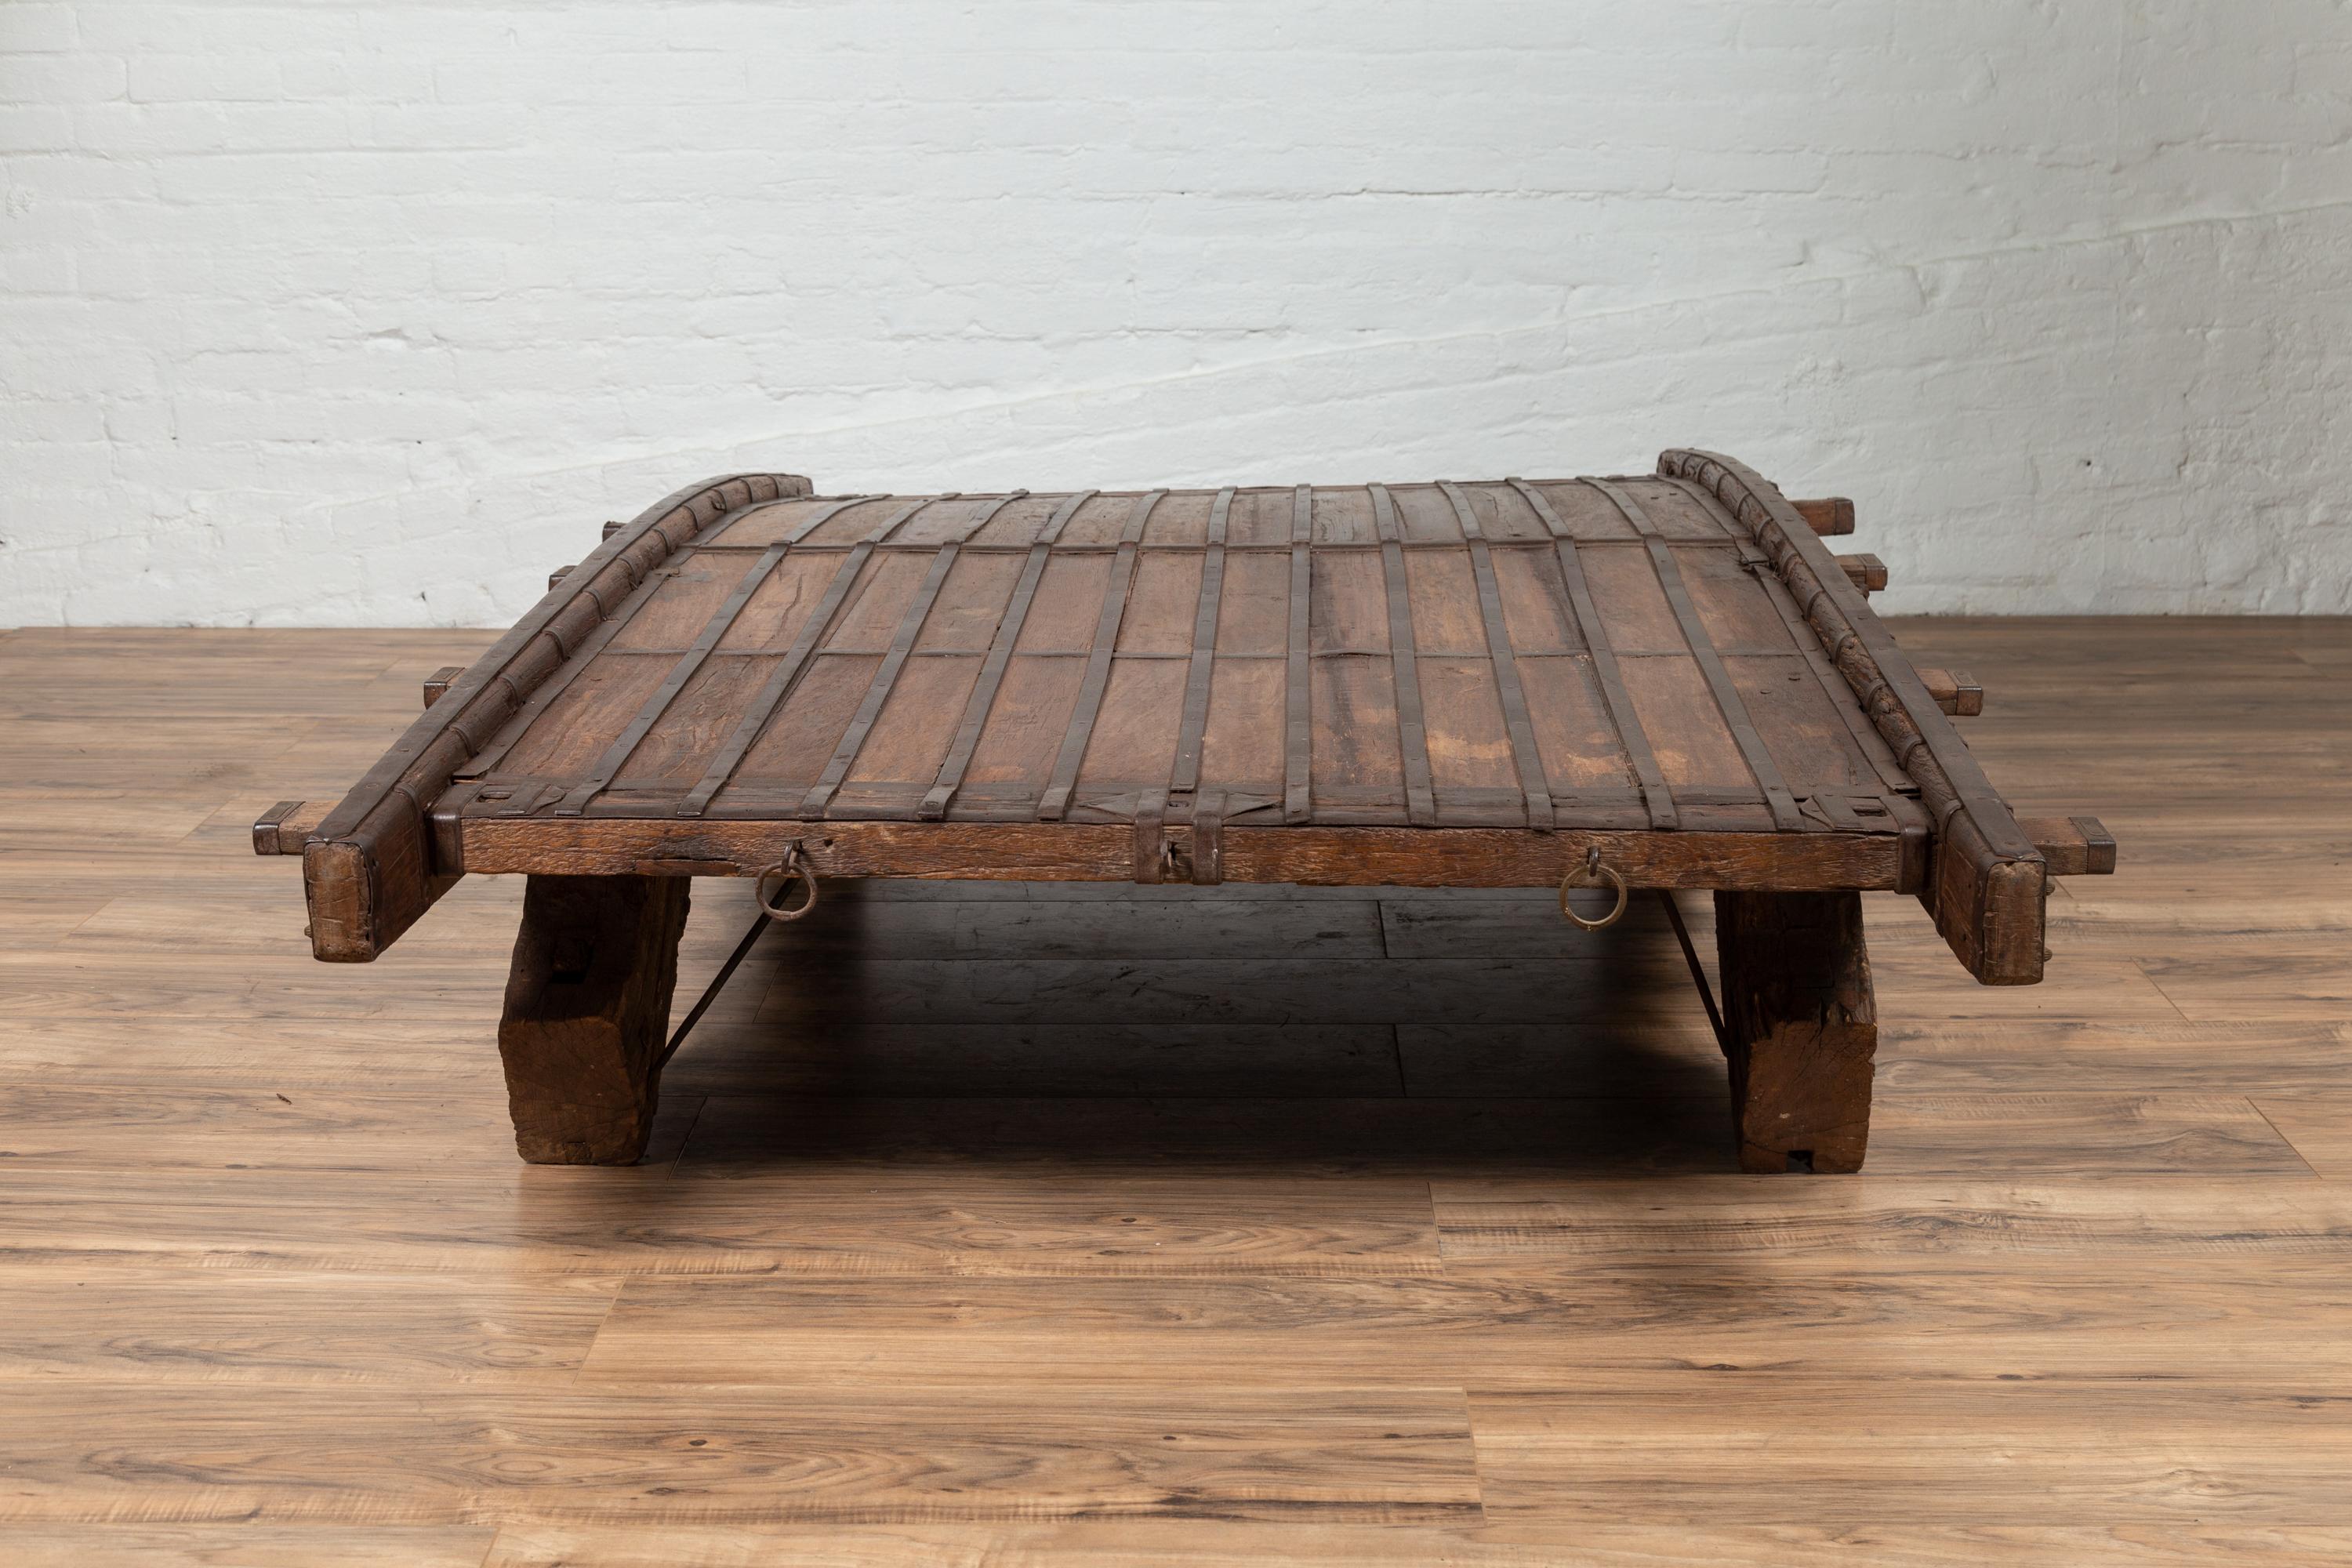 Indian Rustic Antique Wooden Ox Cart with Metal Accents Made into a Coffee Table 6